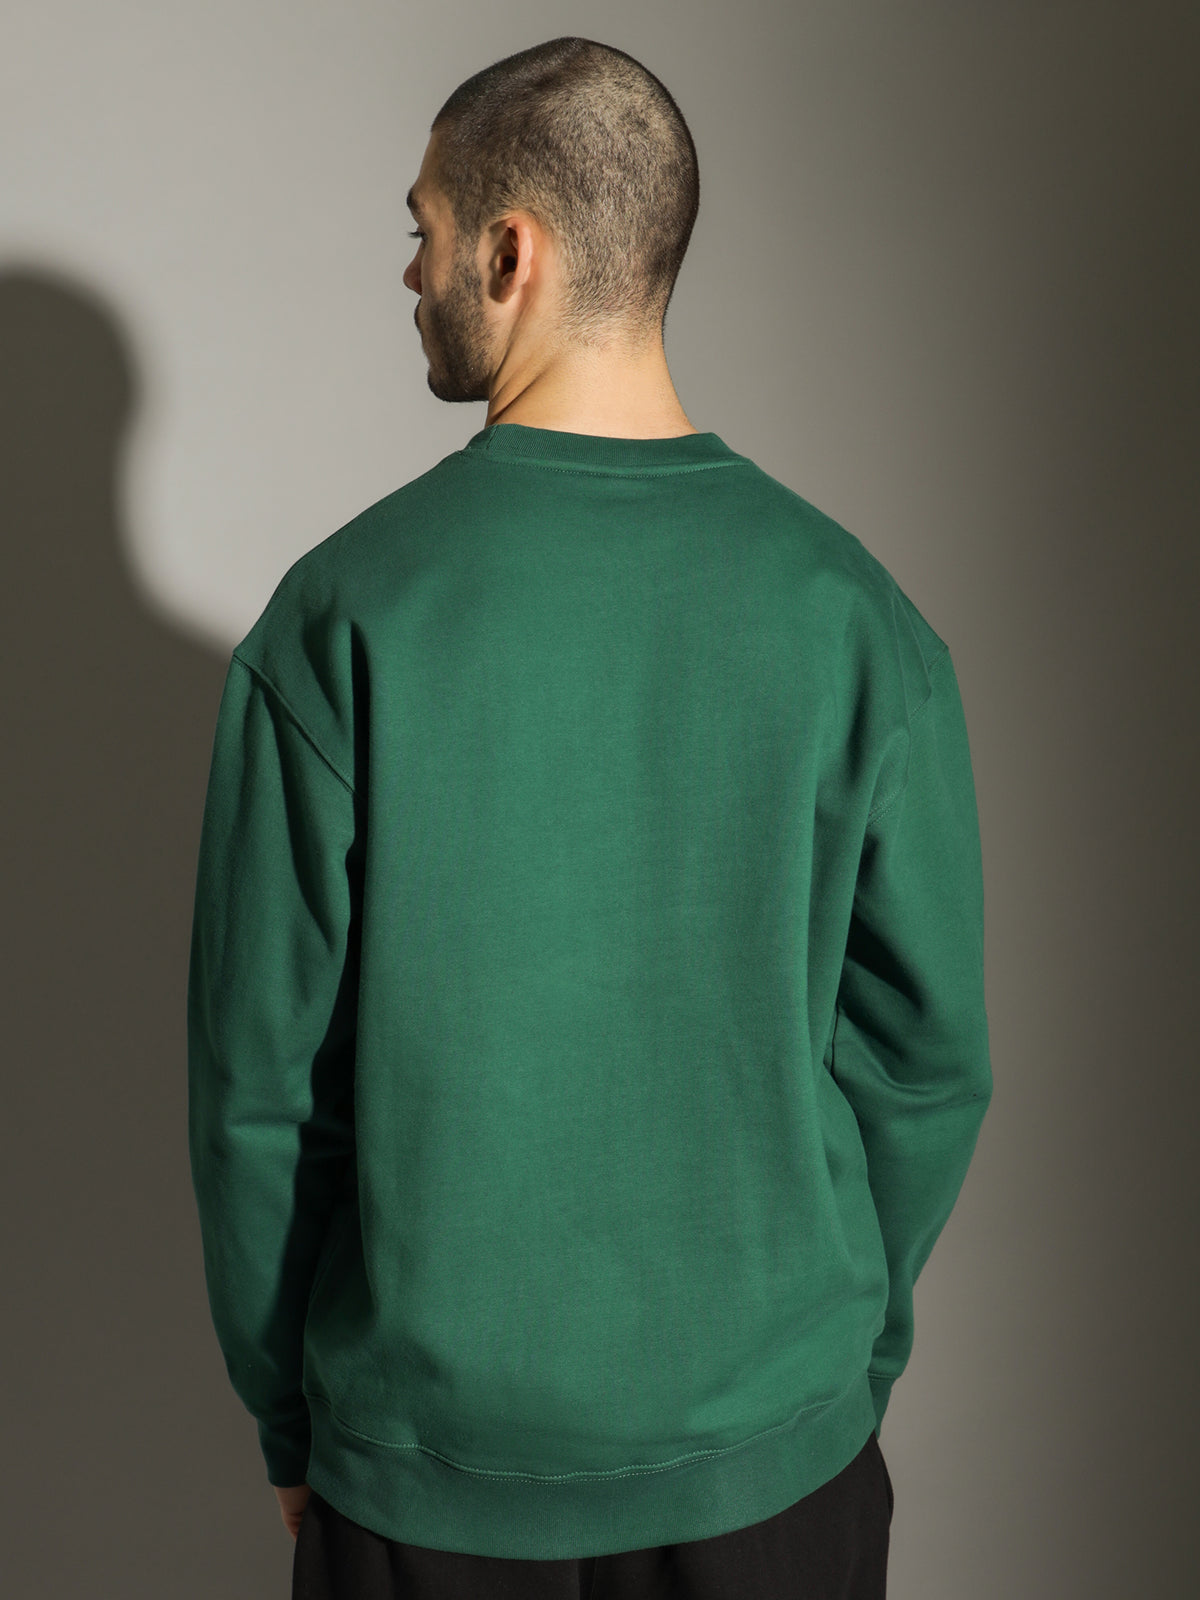 Authentic Steve Jumper in Green Posy